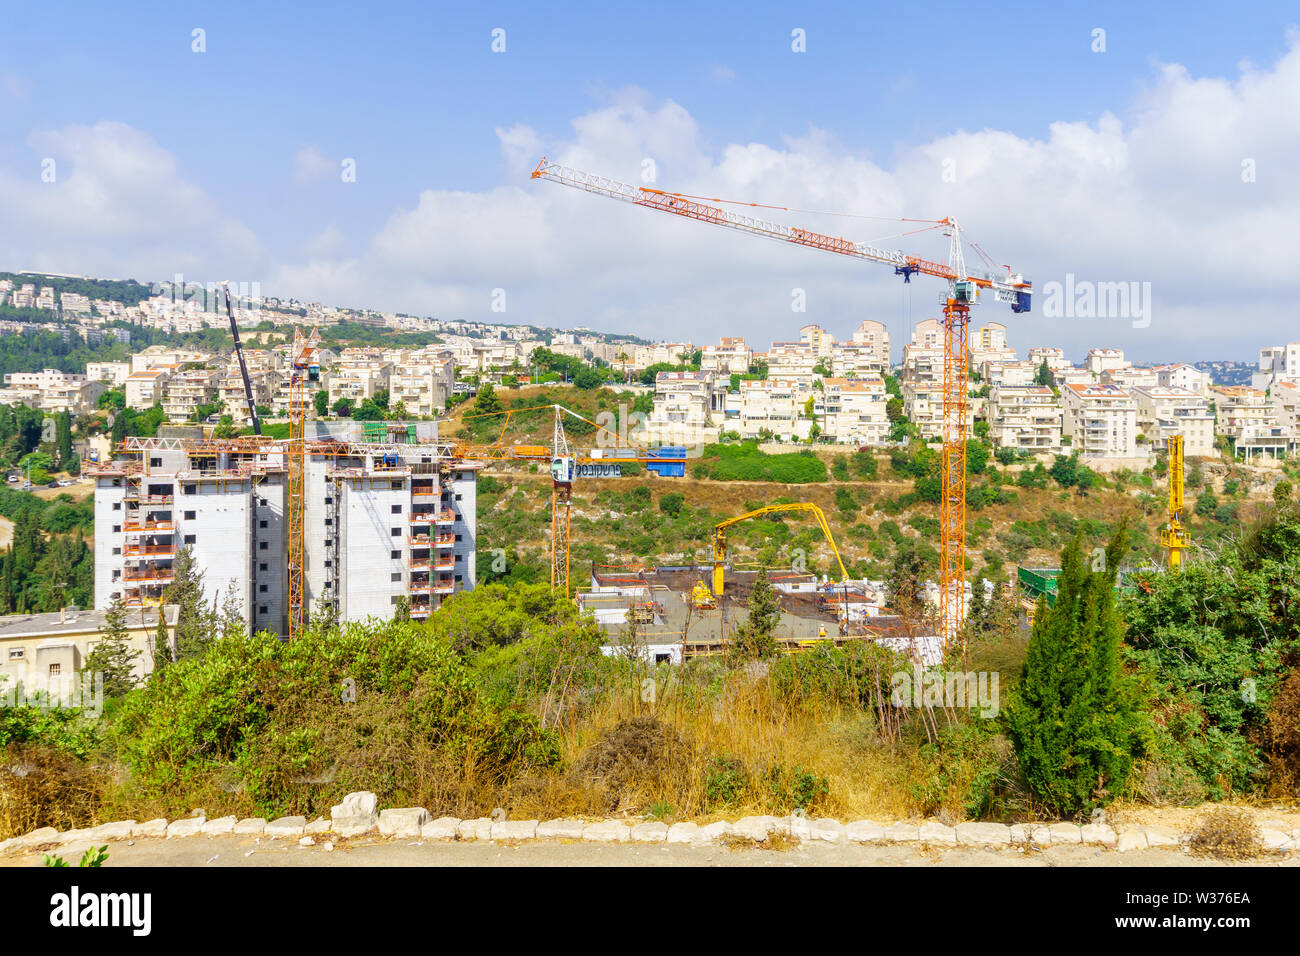 Haifa, Israel - July 12, 2019: Construction site of apartment buildings, with workers. Its an urban renewal project. Haifa, Israel Stock Photo